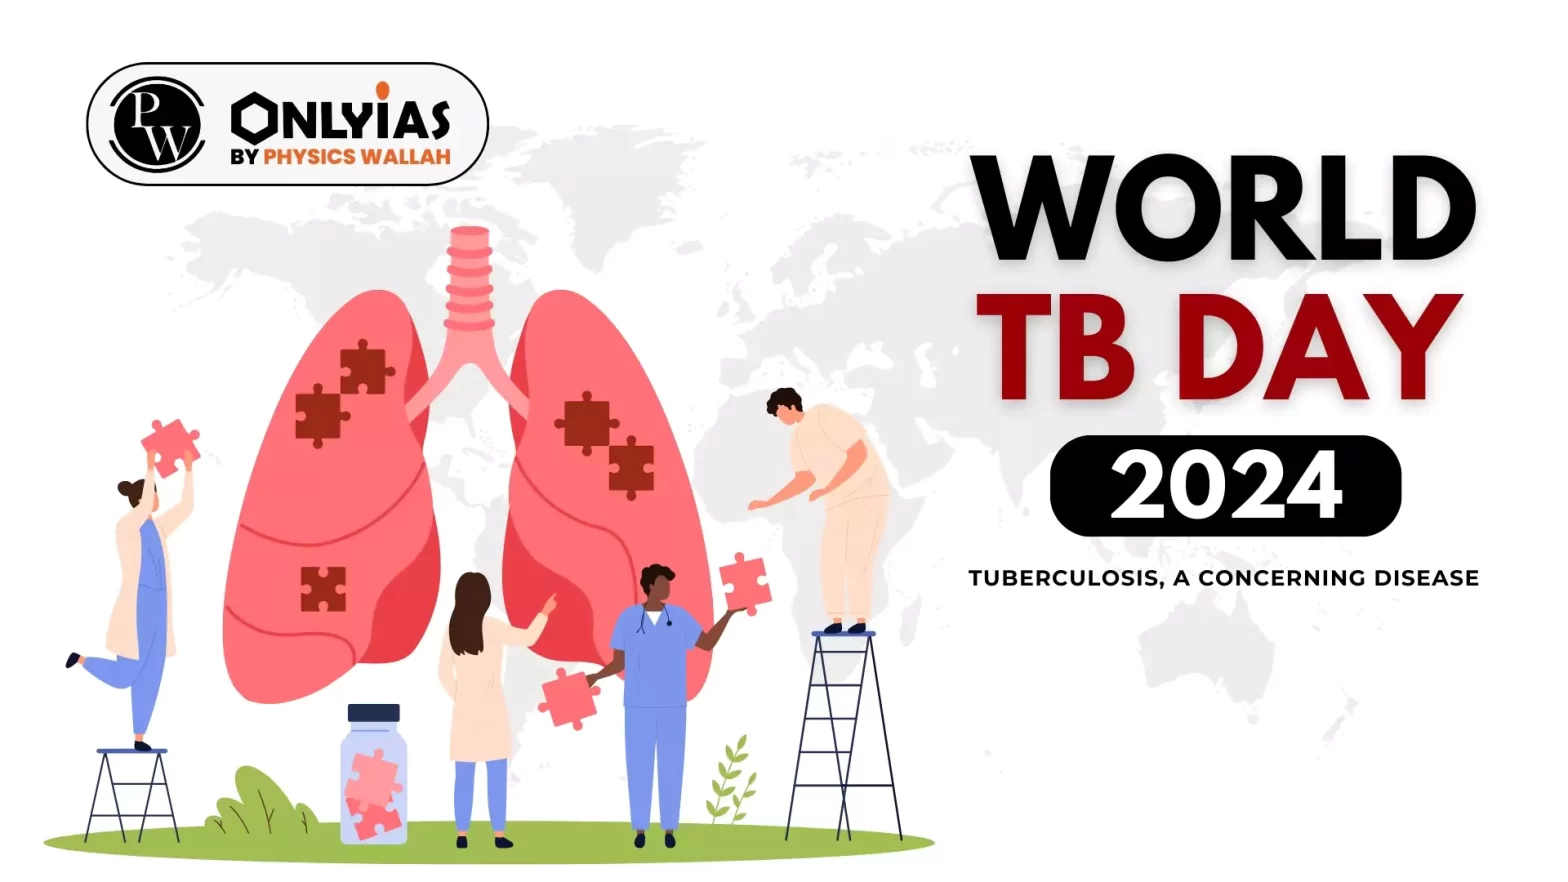 World TB Day 2024: Tuberculosis, A Concerning Disease